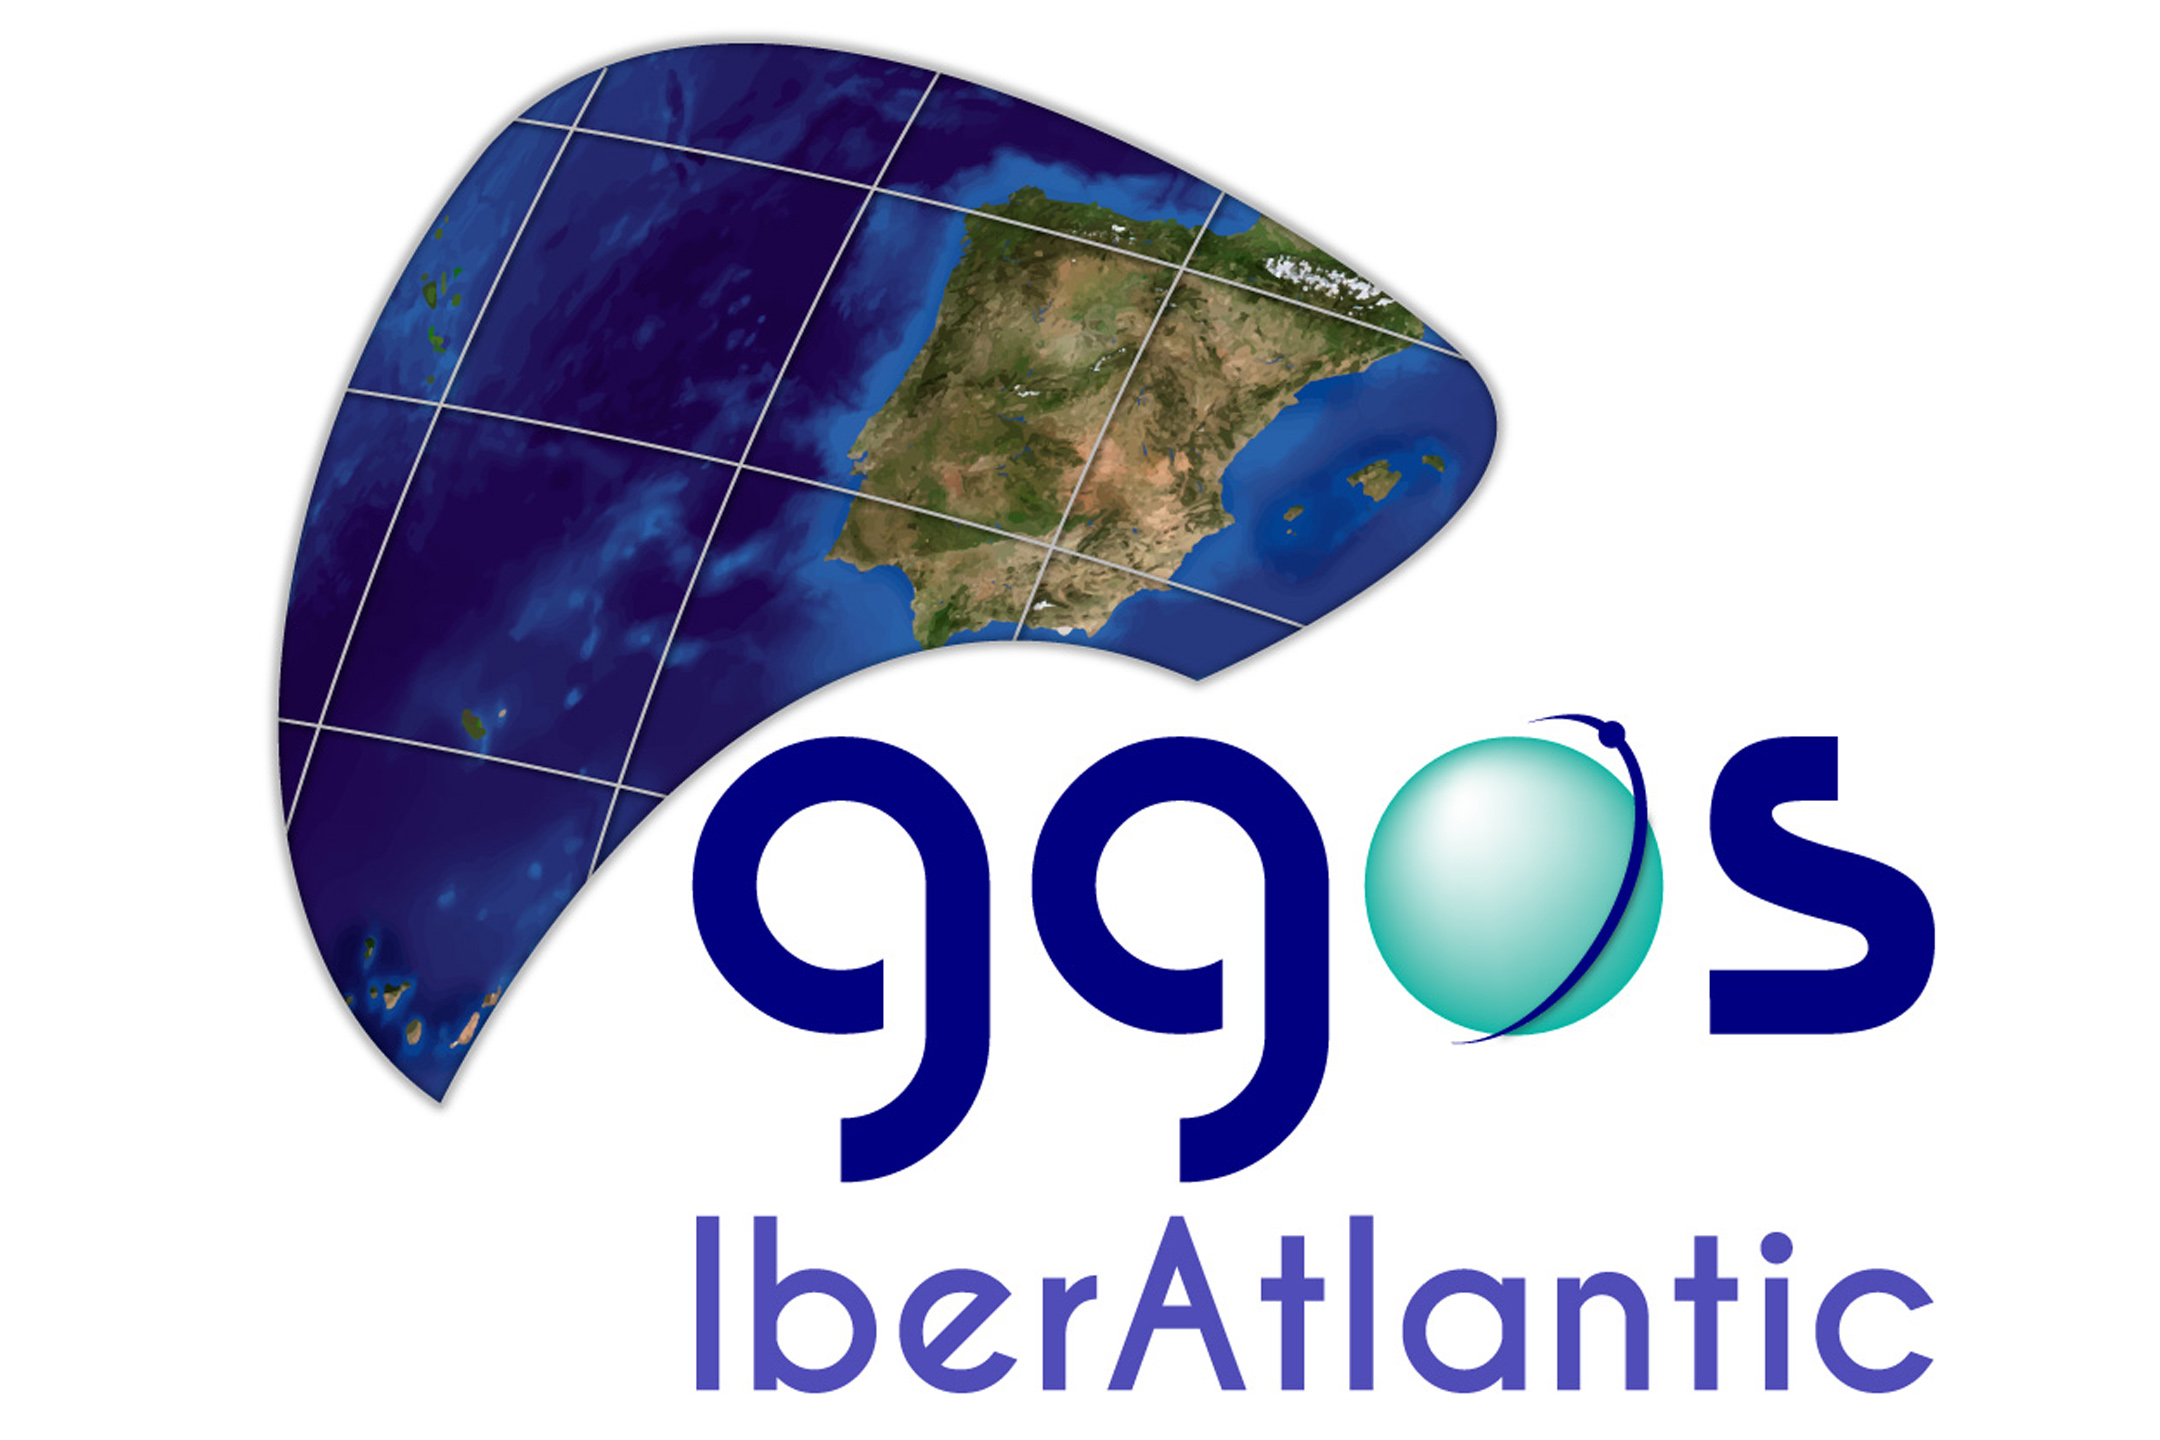 Affiliation of Portugal and Spain to International Geodesy Assembly approved